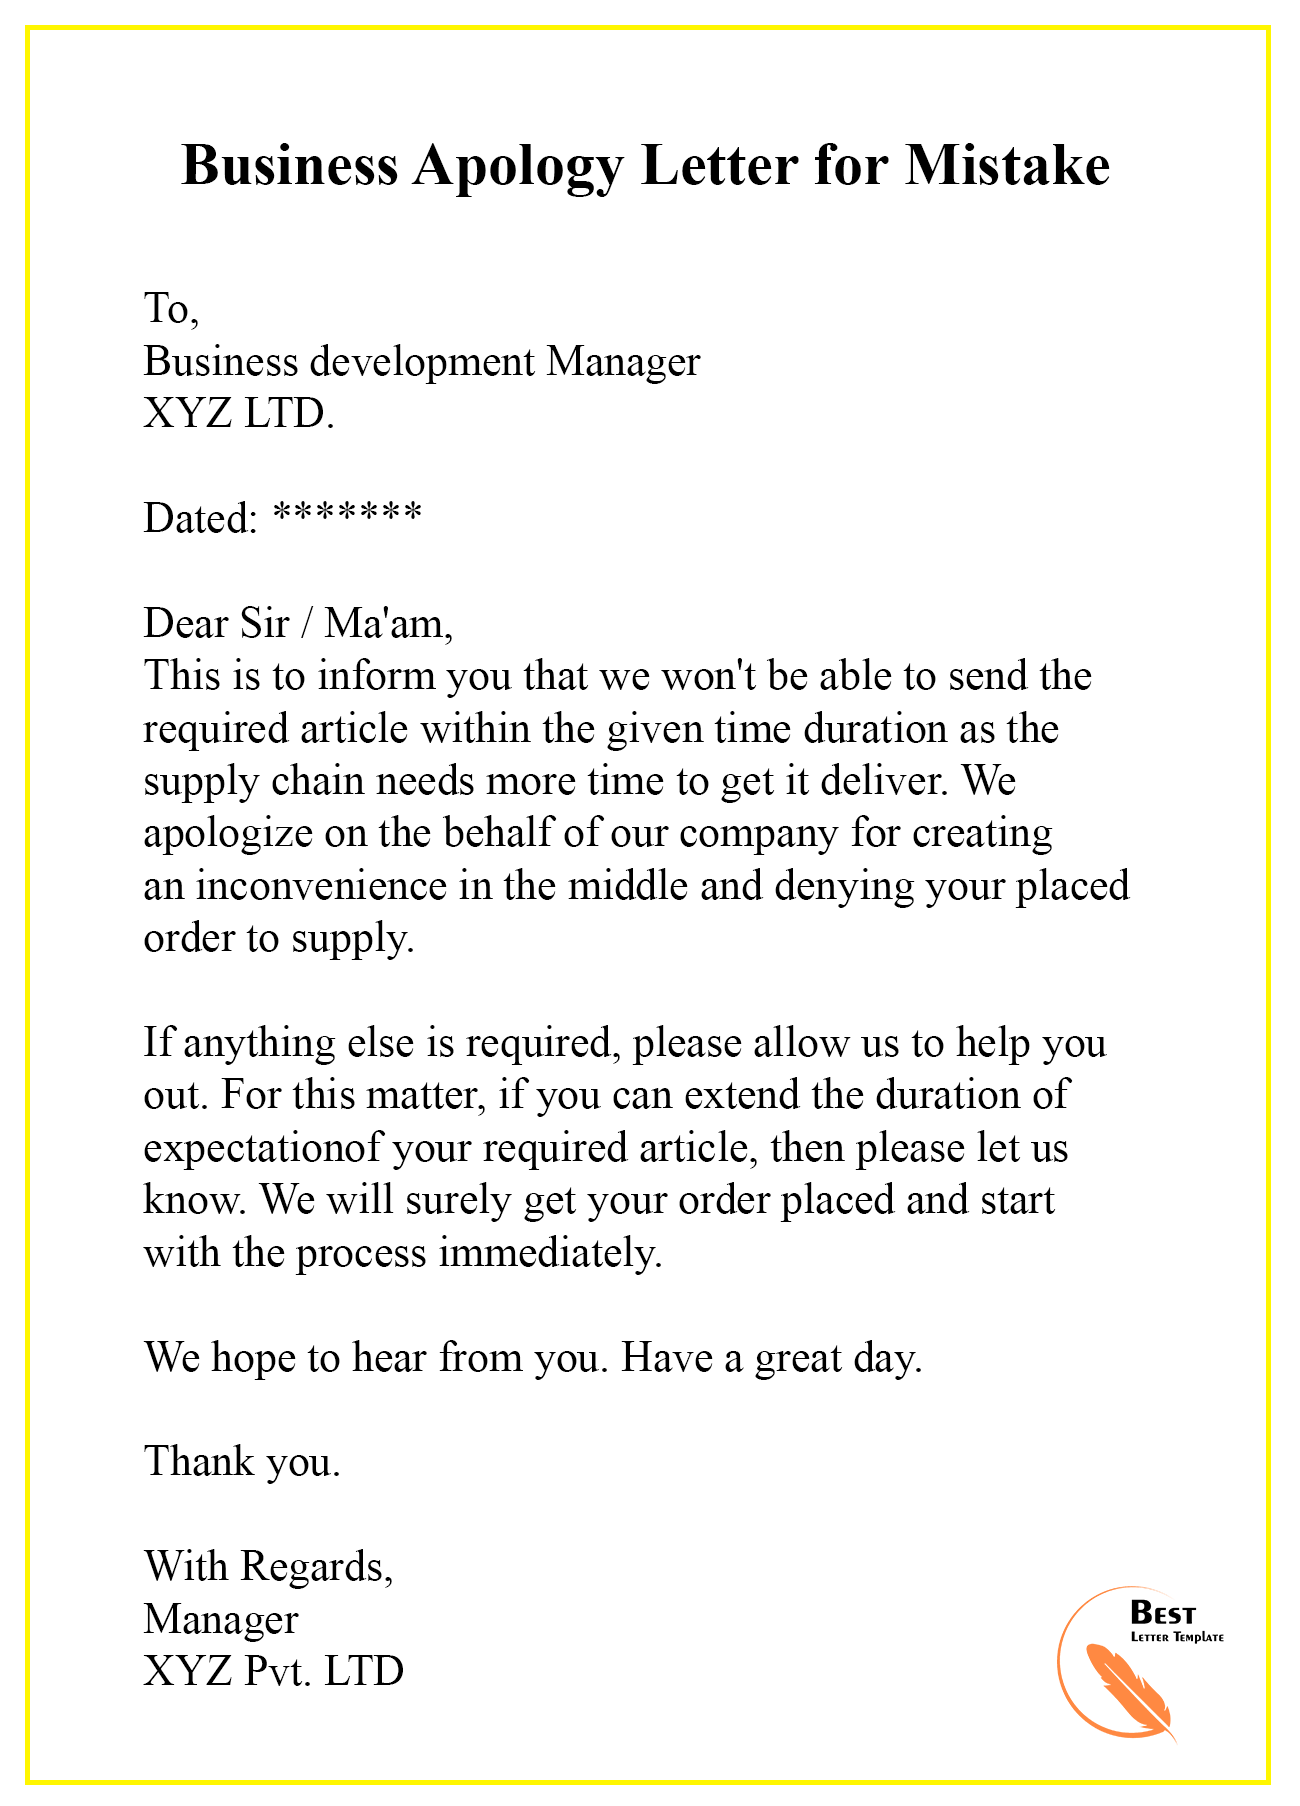 business-apology-letter-for-mistake-best-letter-template